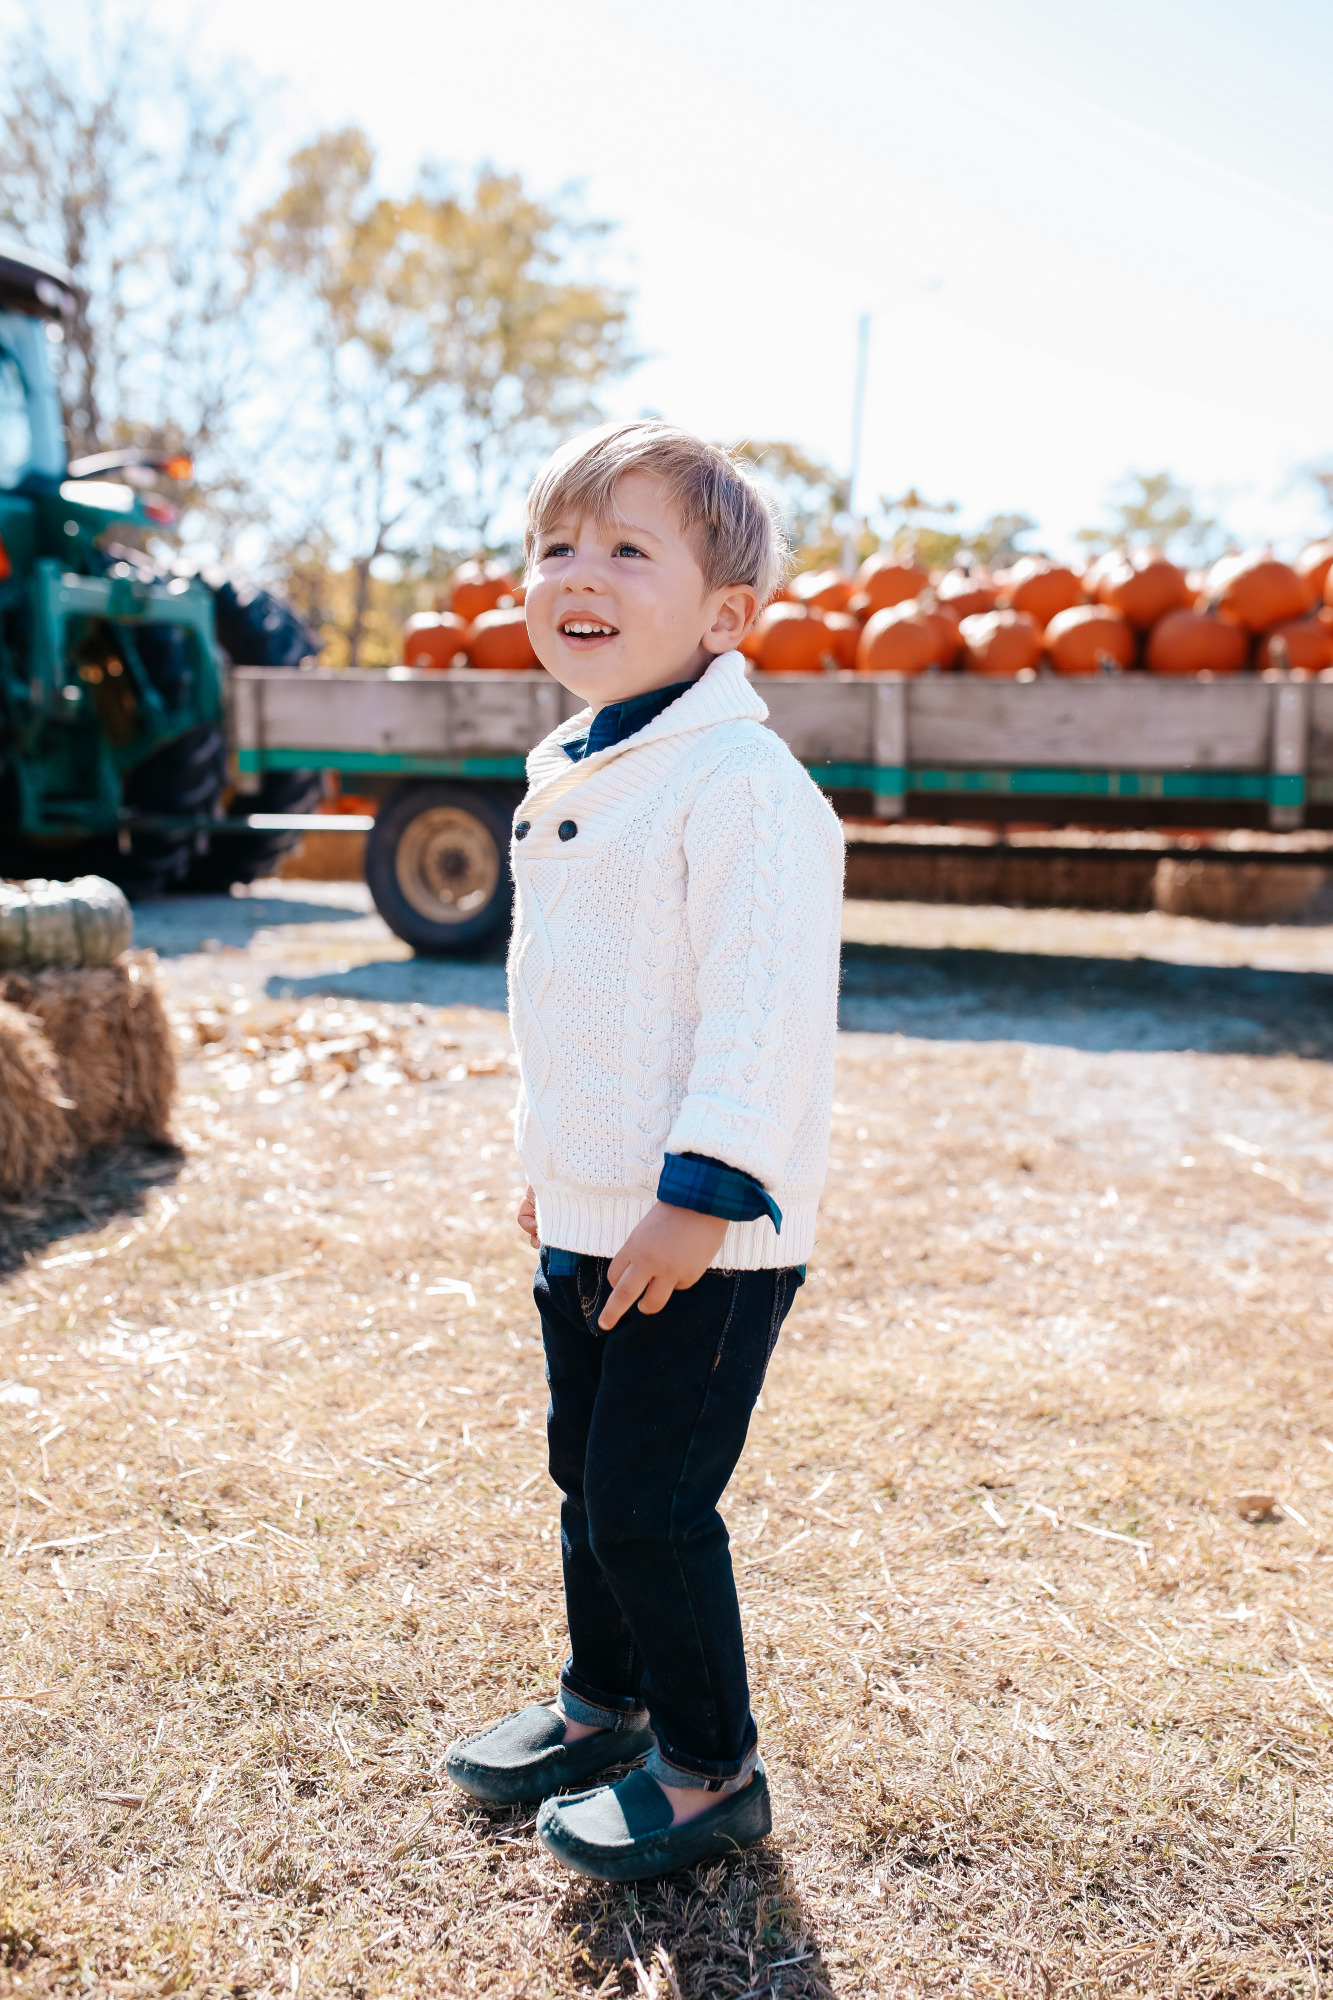 janie and jack kids clothing fall 2020, kids fall fashion 2020, the sweetest thing blog17 |janie and jack kids clothing fall 2020, kids fall fashion 2020, the sweetest thing blog17 | Janie and Jack Kids Clothing by popular US fashion blog, The Sweetest Thing: image of a boy wearing a Janie and Jack PLAID POPLIN SHIRT, Janie and Jack SHAWL COLLAR PULLOVER, Janie and Jack SLIM SELVEDGE JEAN IN MOONLIGHT INDIGO WASH, Janie and Jack LEATHER TRIM BELT, Janie and Jack ARGYLE SOCK, Janie and Jack SUEDE DRIVING SHOE.